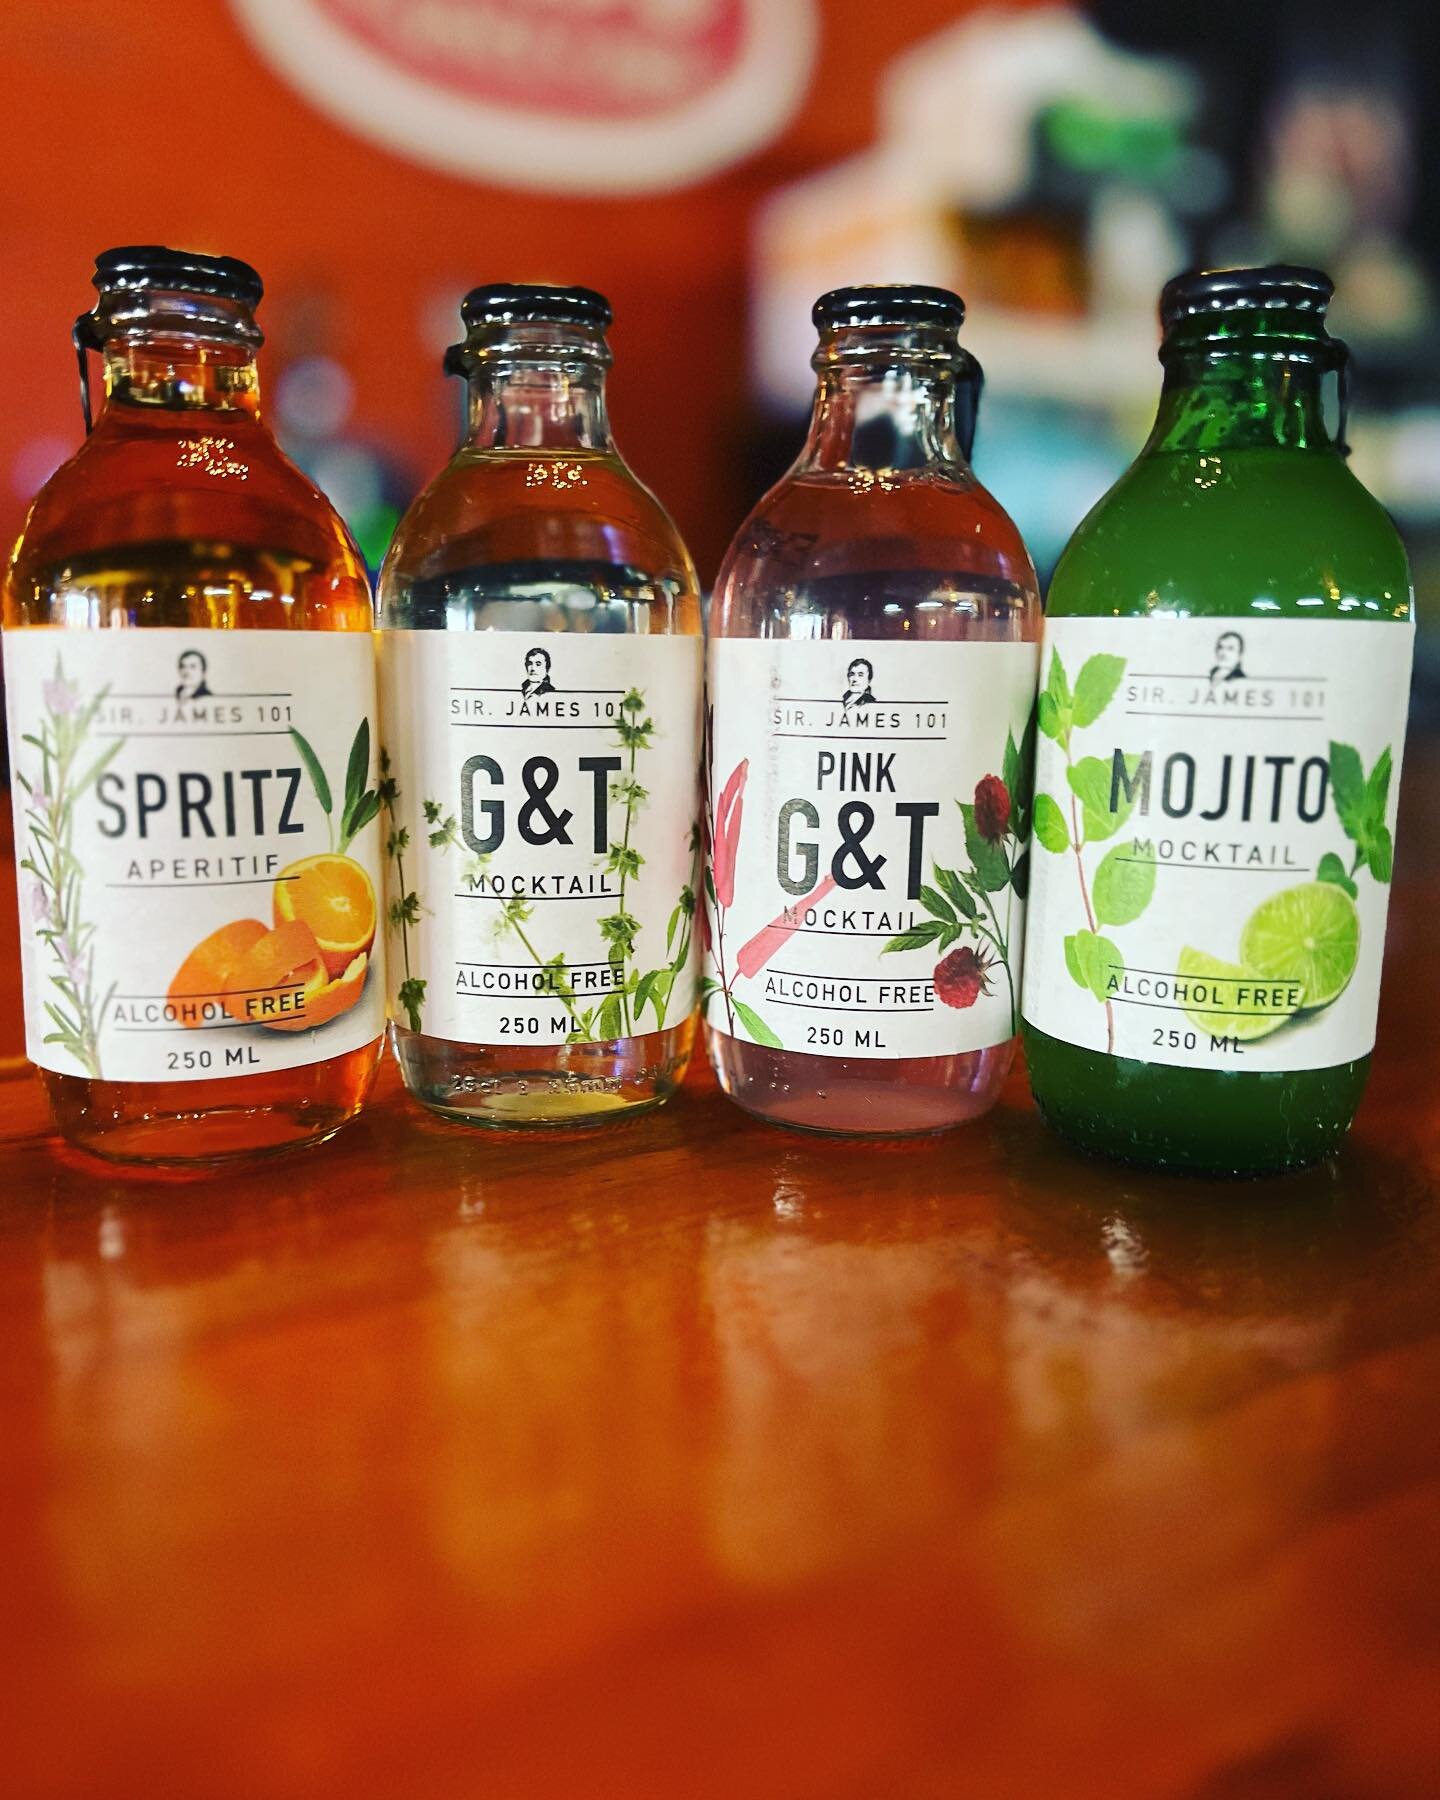 Trying #soberoctober? We&rsquo;ve got new N/A options for you in The Lounge &amp; the store with more to come! Pop in for a spiritless bev or 2. #nonalcoholicdrinks @sirjames101drinks @betterrhodes @fedwaycraft @blindtigercocktails @tostbeverages @mi